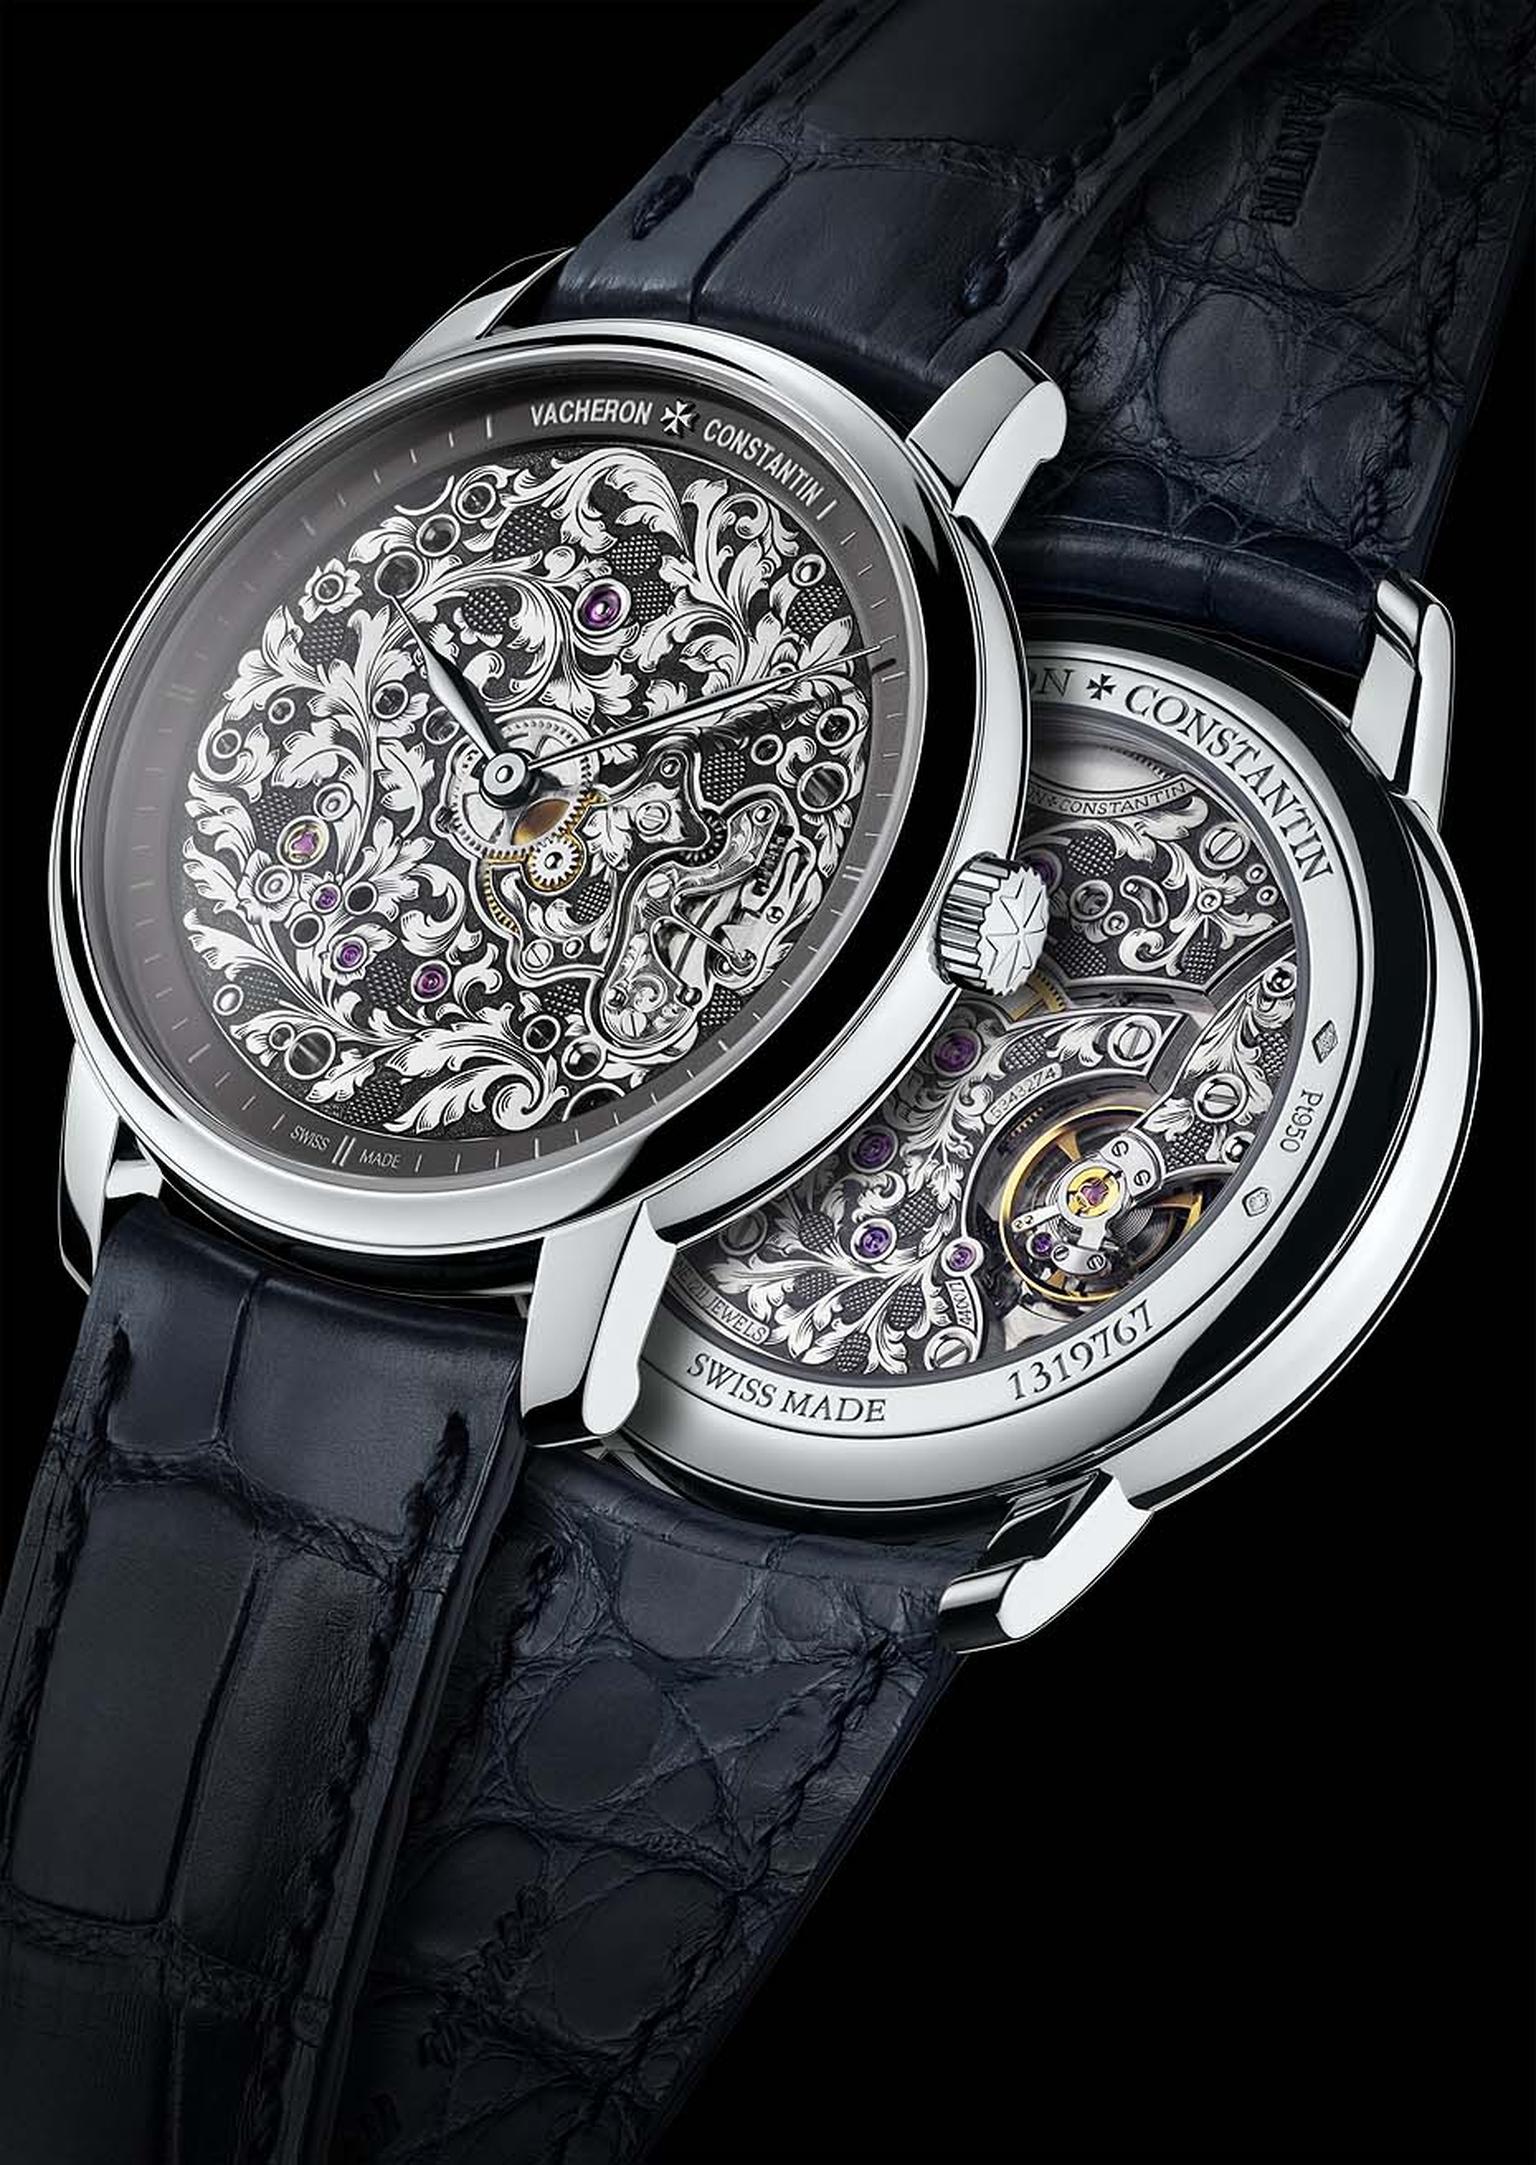 Vacheron Constantin Métiers d'Art Mécaniques Gravées calibre 4400 has been hand-engraved with acanthus leaf motifs on both sides of the movement. The watch is presented in a 39mm platinum case.